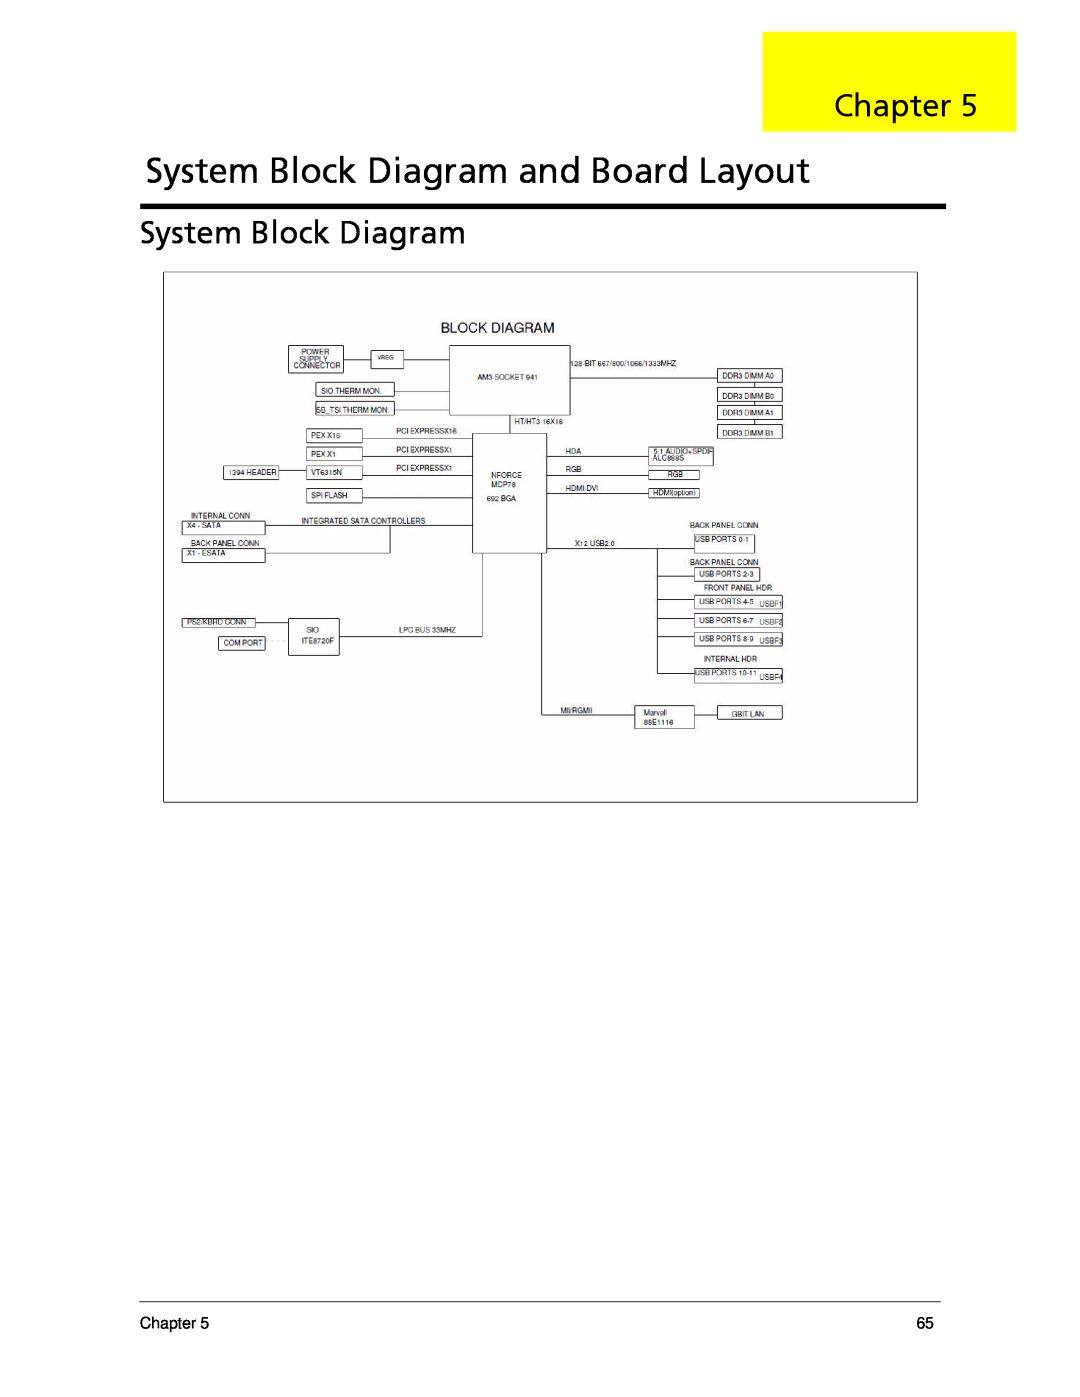 Acer X5300, X3300 manual System Block Diagram and Board Layout, Chapter 